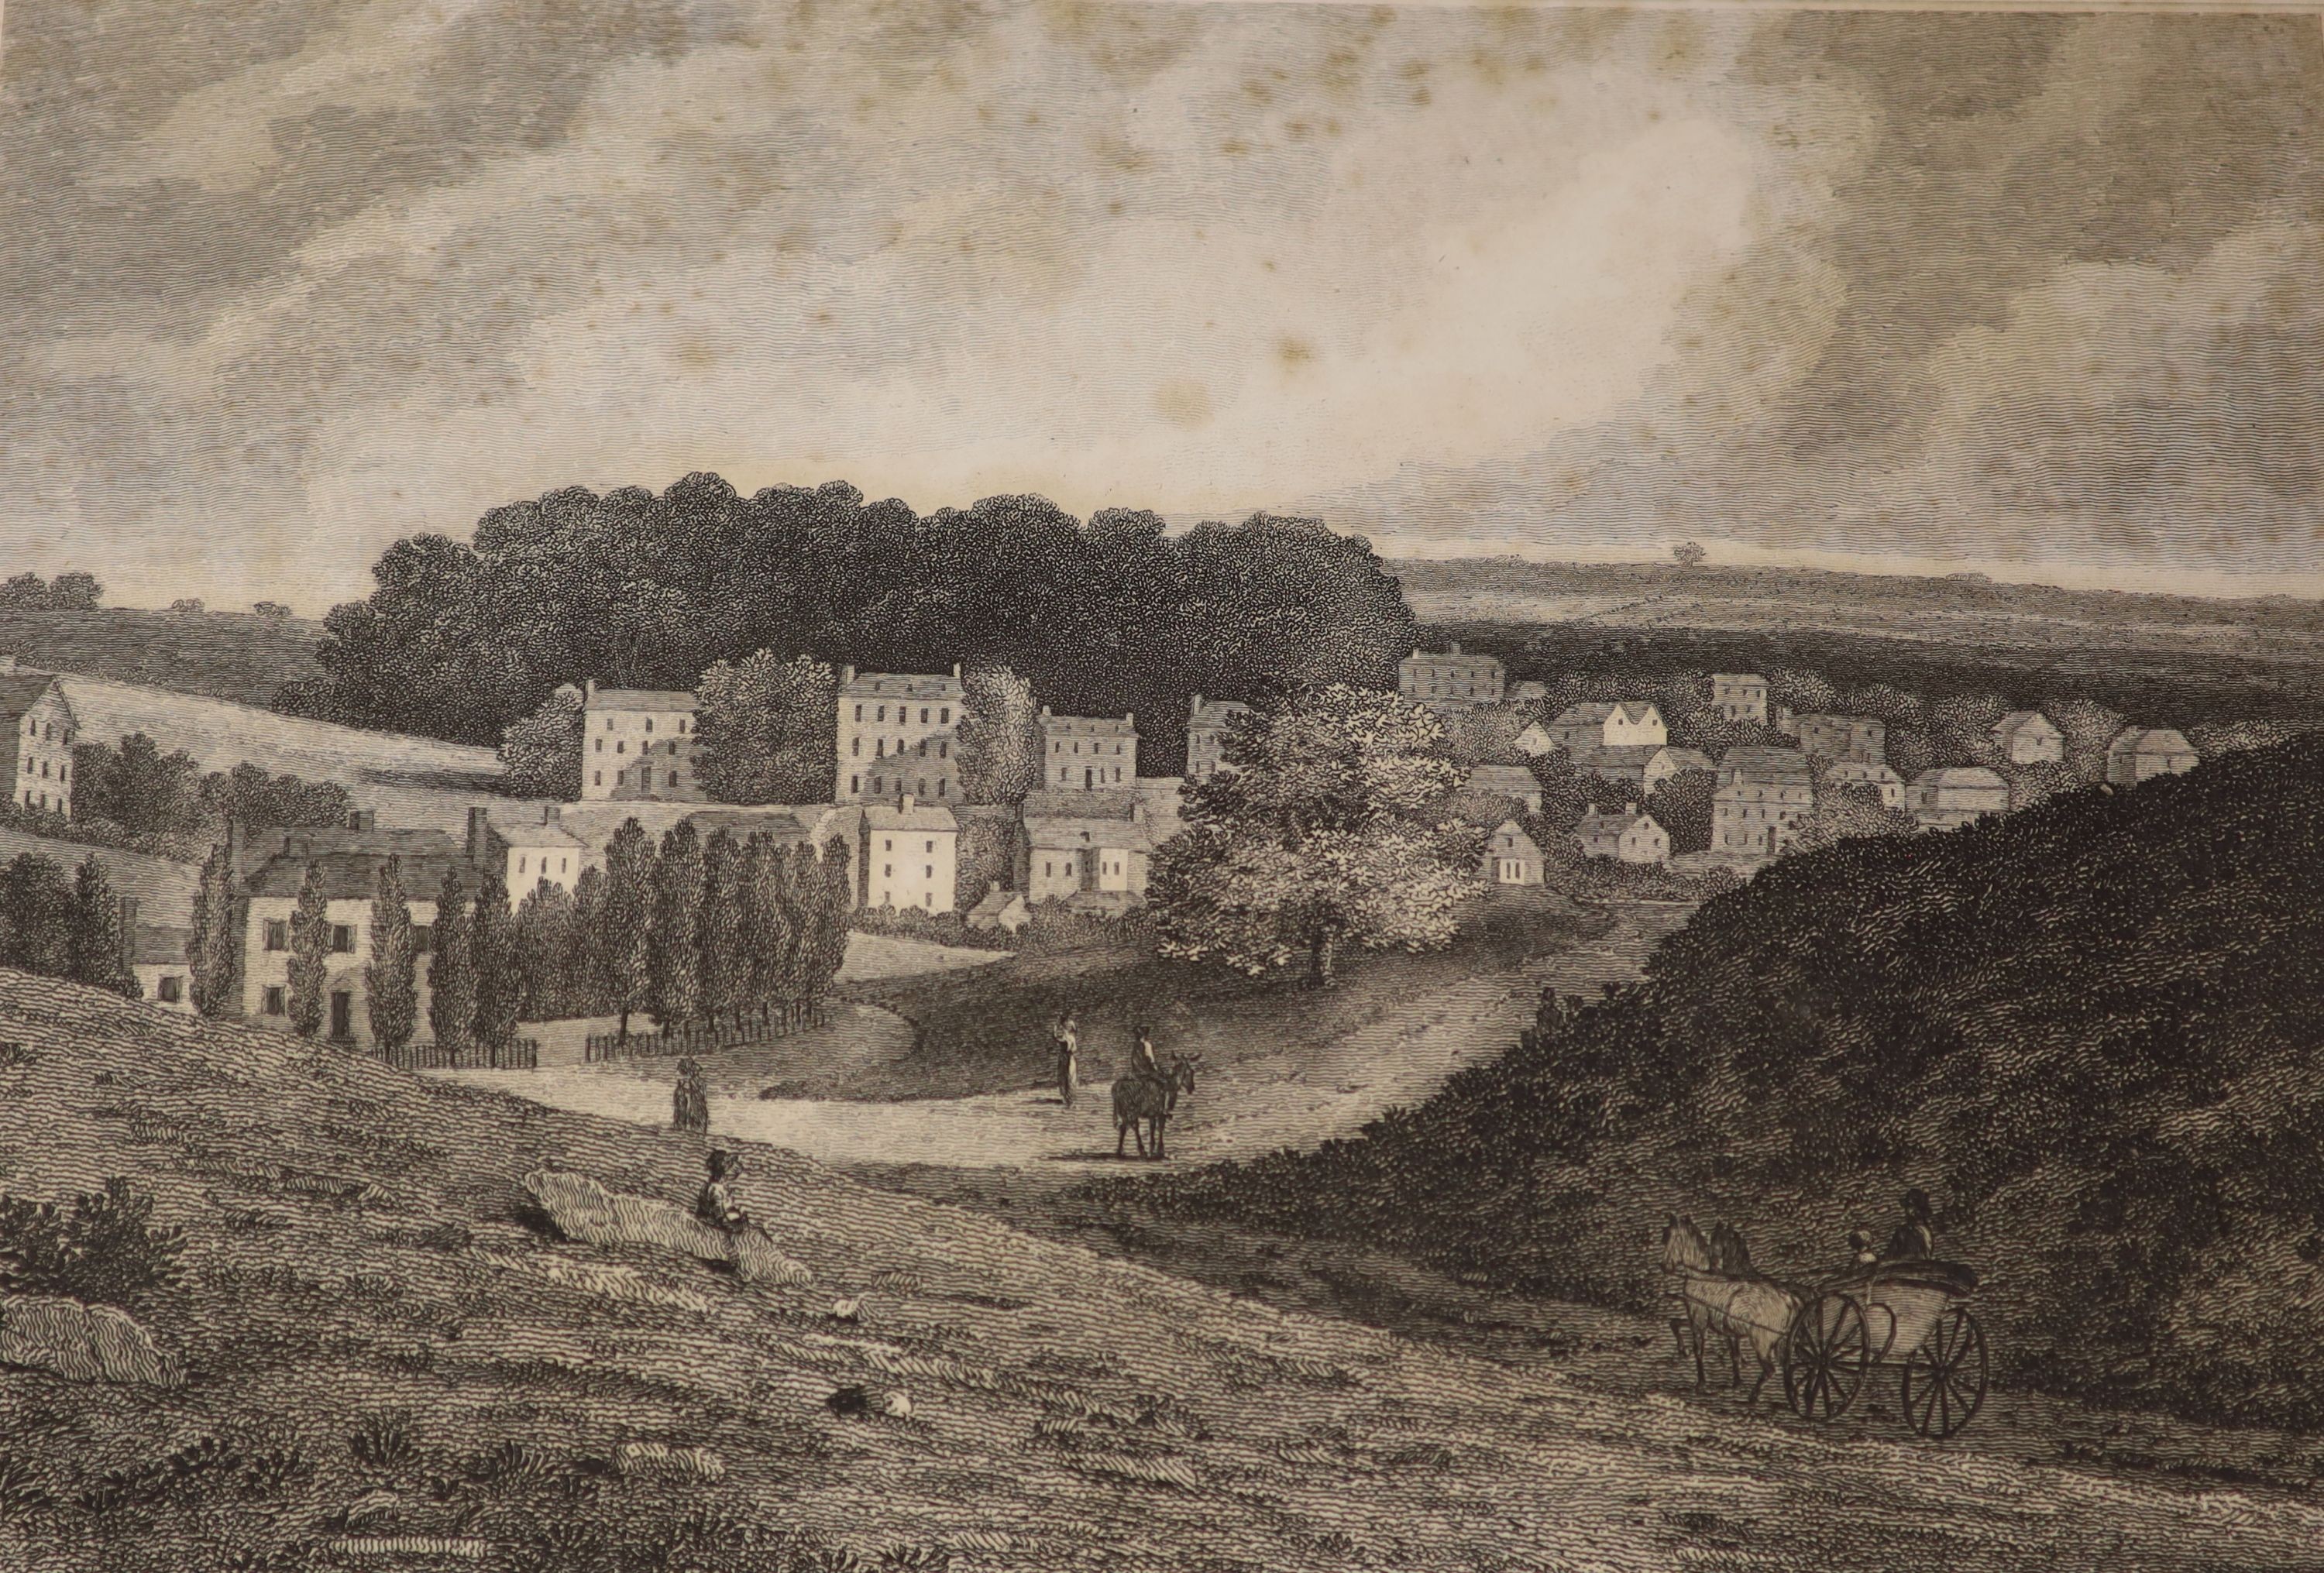 Amsinck, Paul - Tunbridge Wells, and its Neighbourhood, illustrated by a series of etchings, and historical descriptions. 30 engraved plates & several text vignette illus., half title